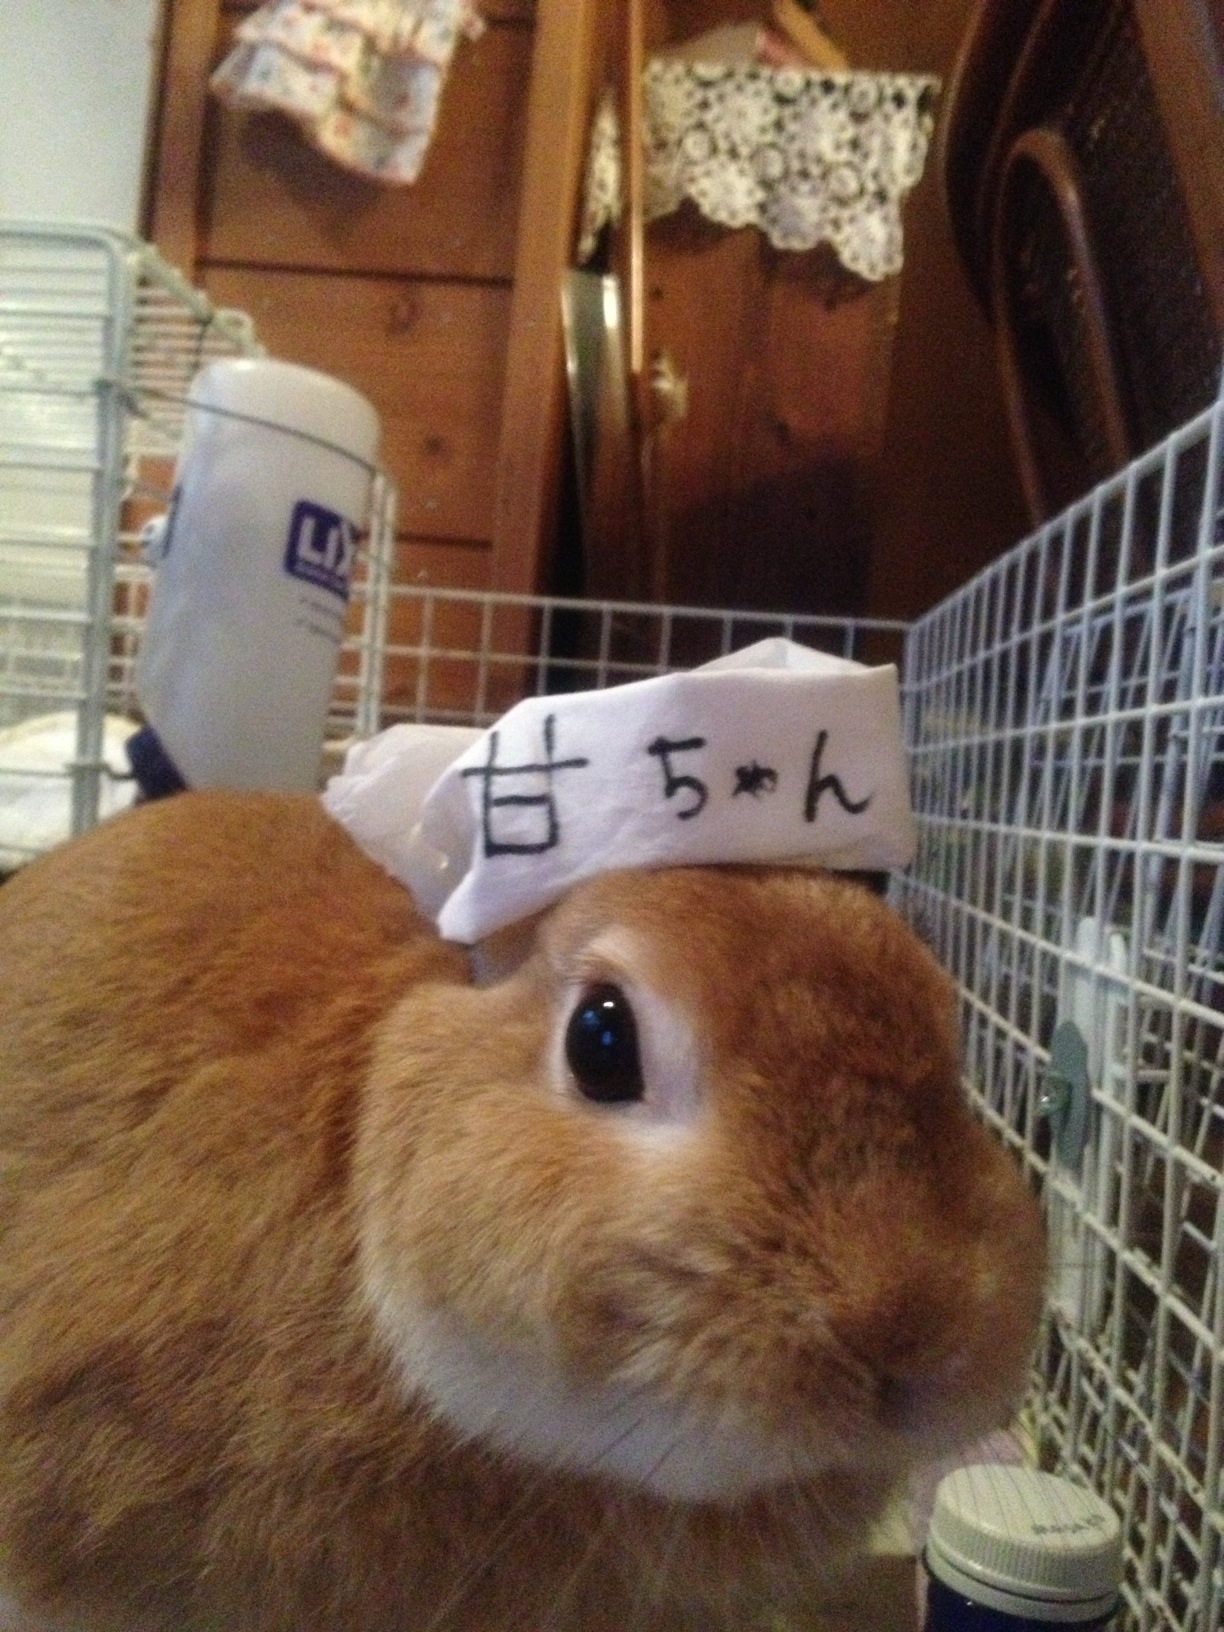 Bunny Cosplays a Character from His Favorite Show